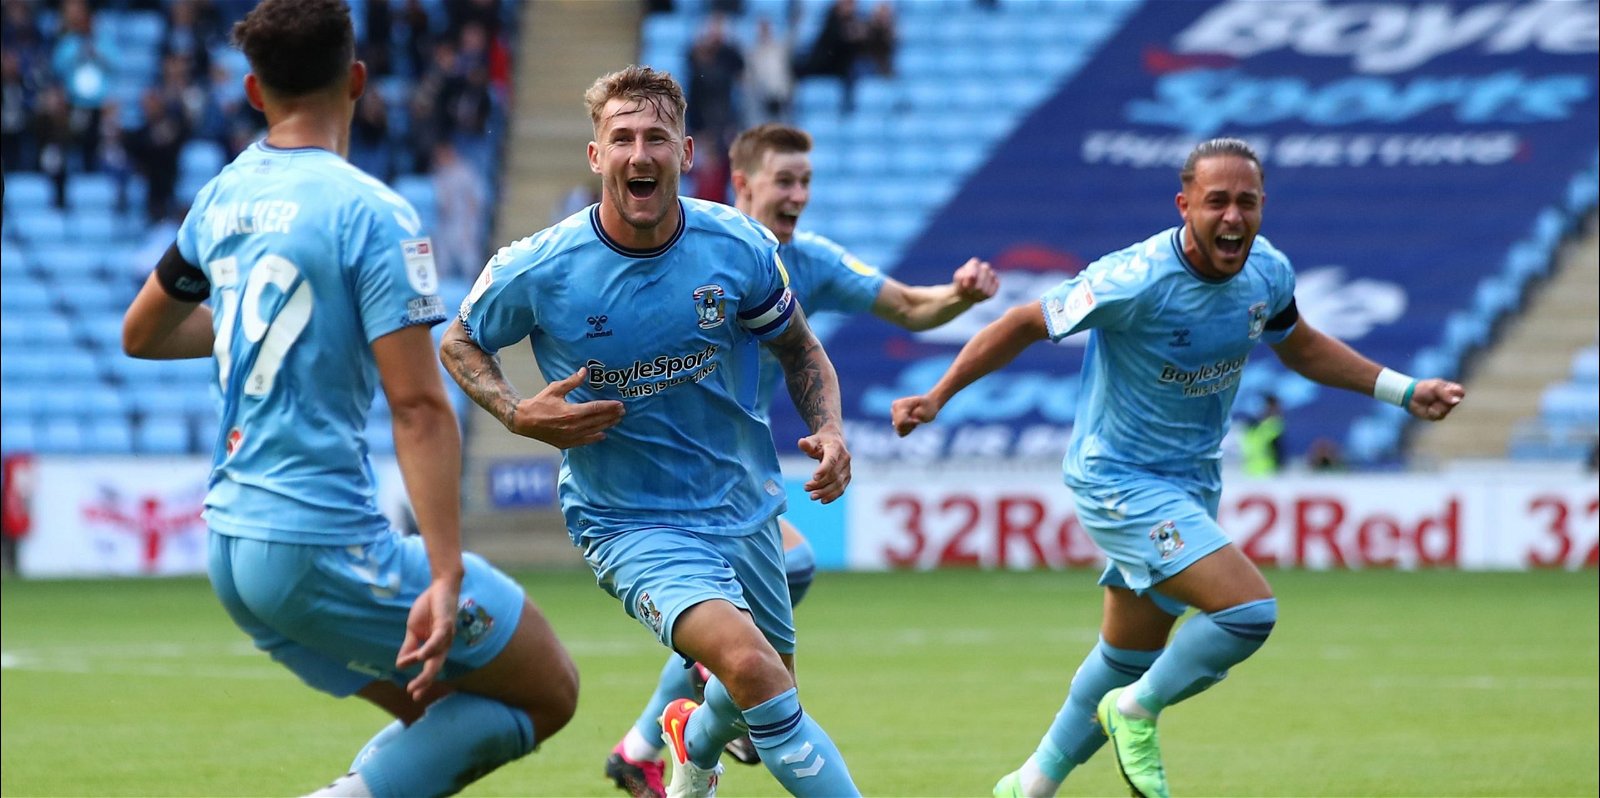 Coventry, The 6 Coventry City players entering the final six months of their contracts in January